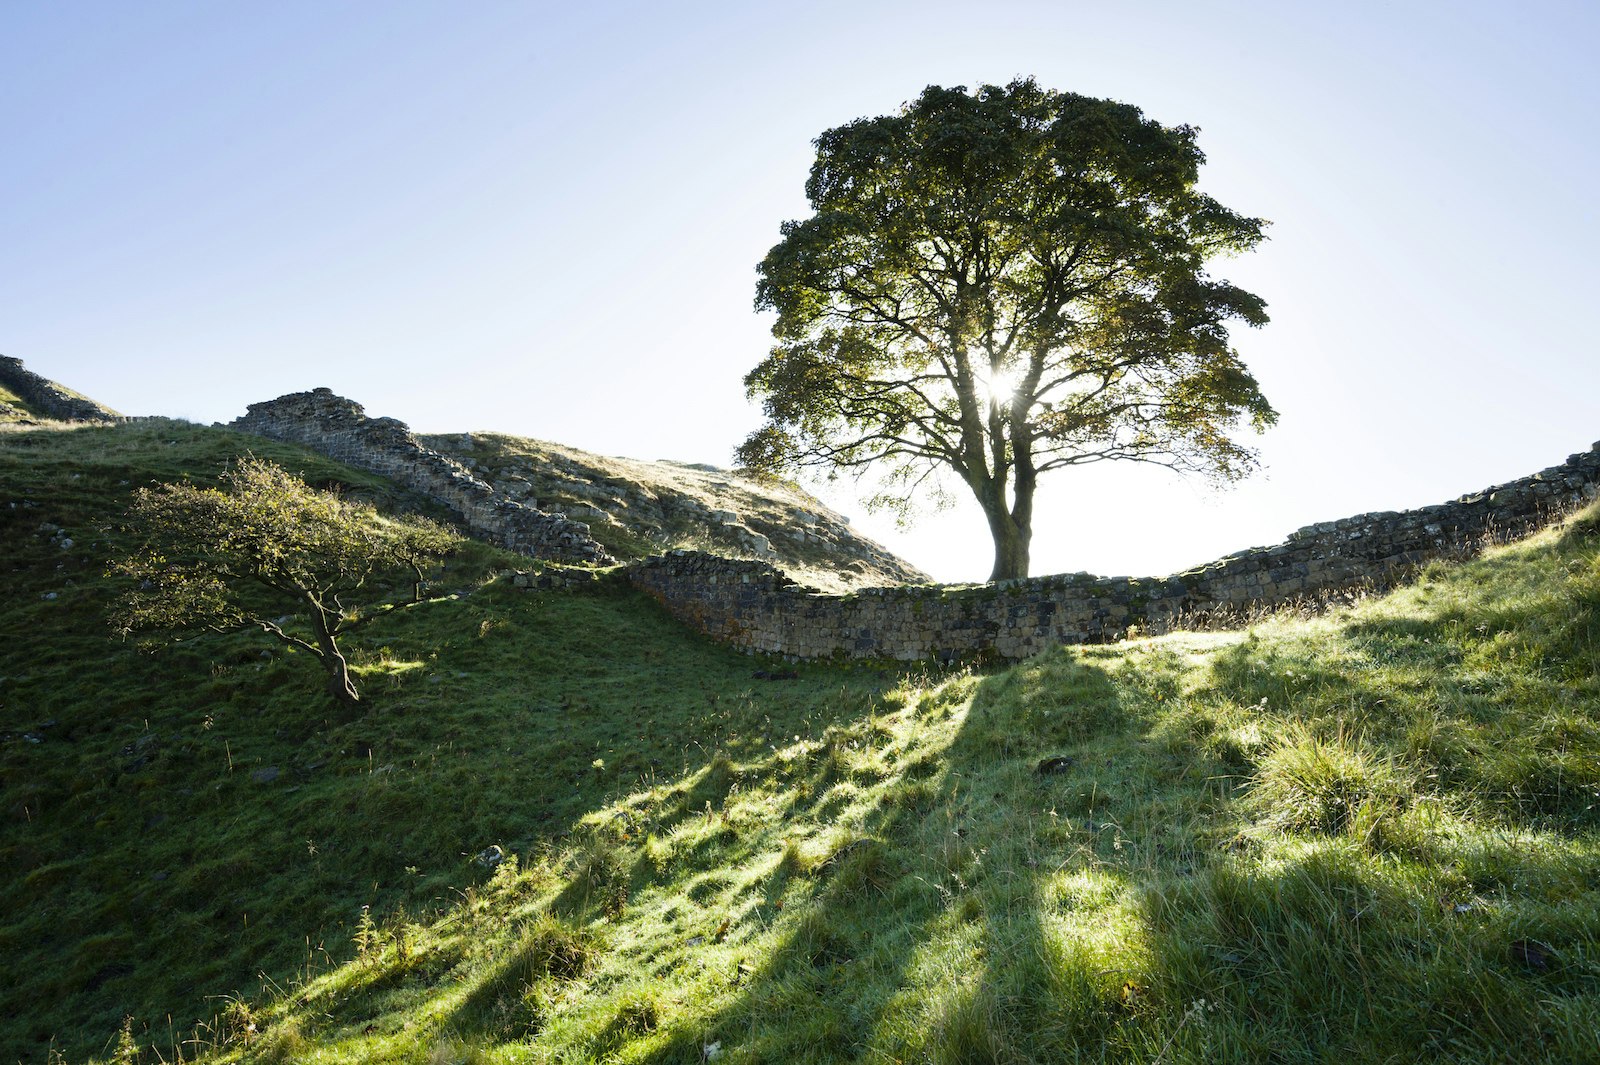 Hadrian's Wall at Sycamore Gap, the sunlight shining through a tree and breaking up shadows on the hills and  grass